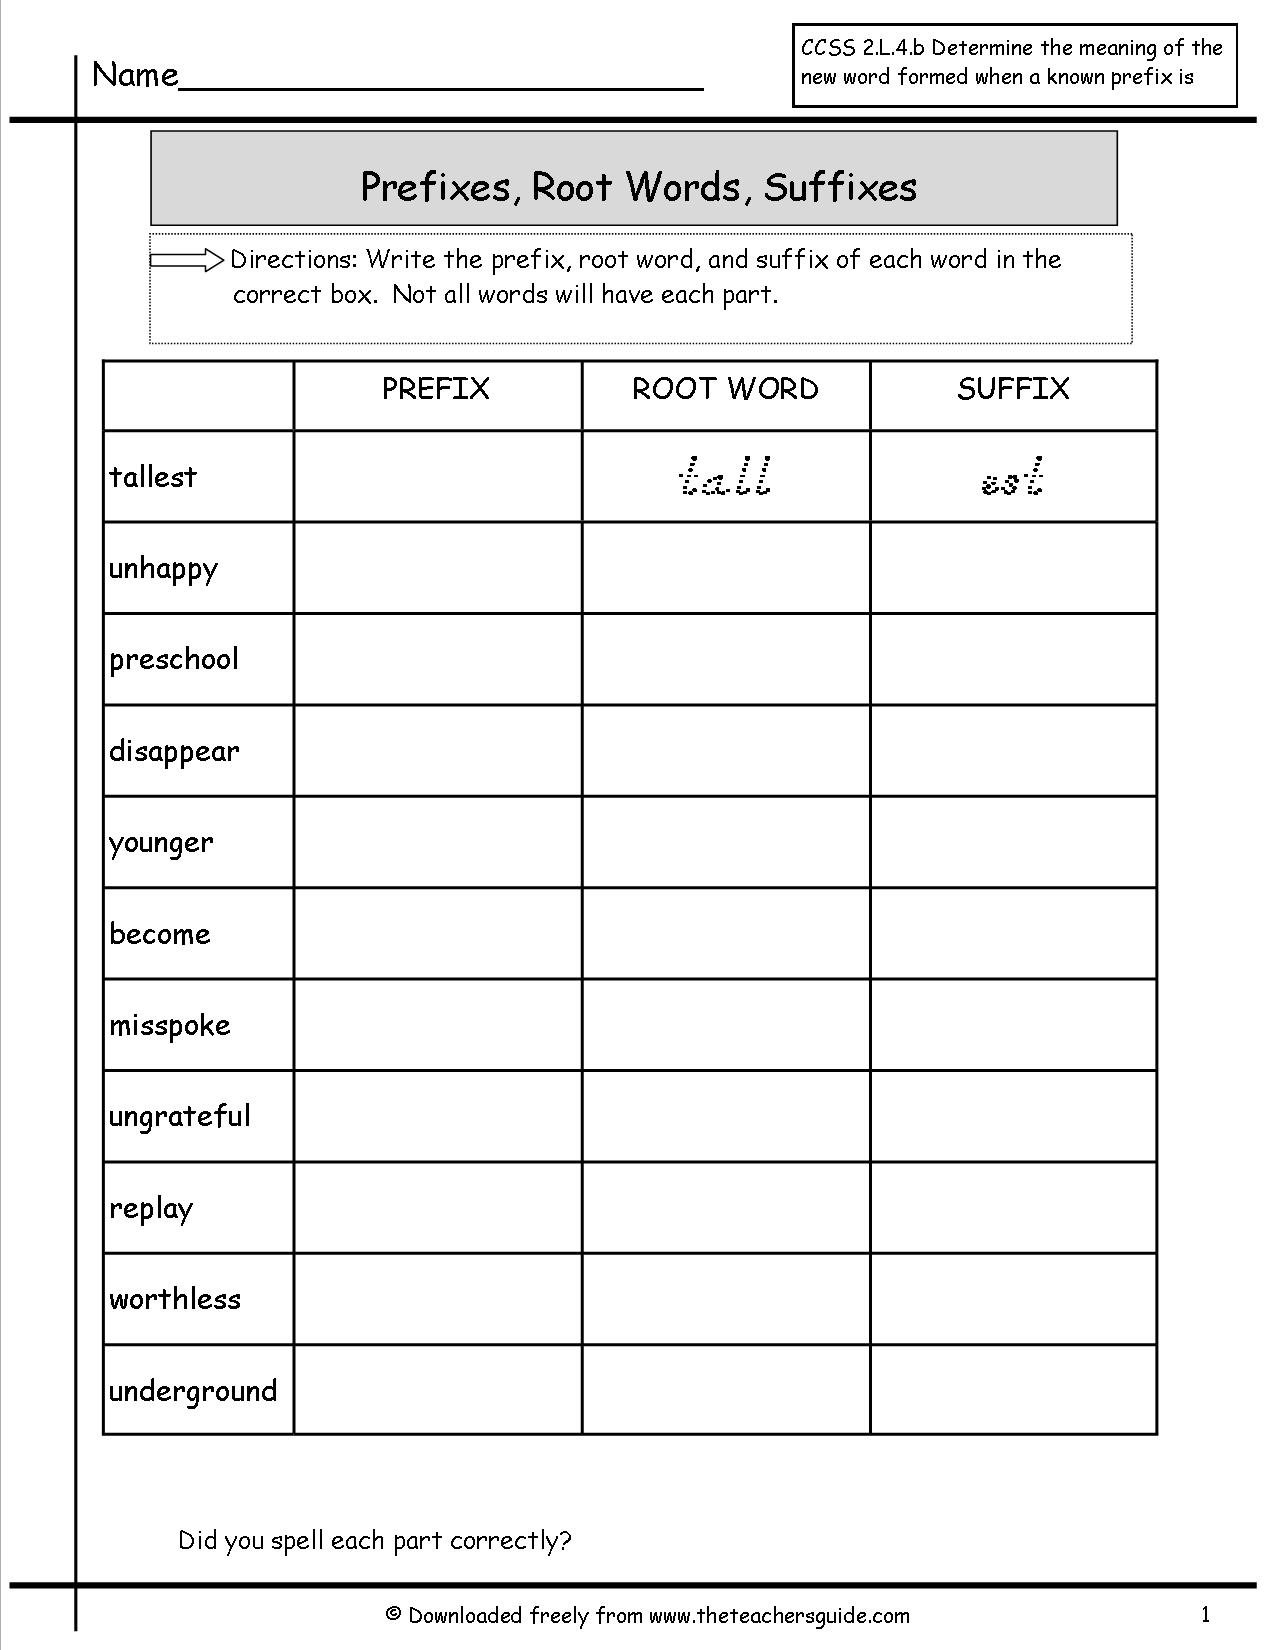 Free Prefixes And Suffixes Worksheets From The Teacher's Guide For Prefix And Suffix Worksheets 5Th Grade